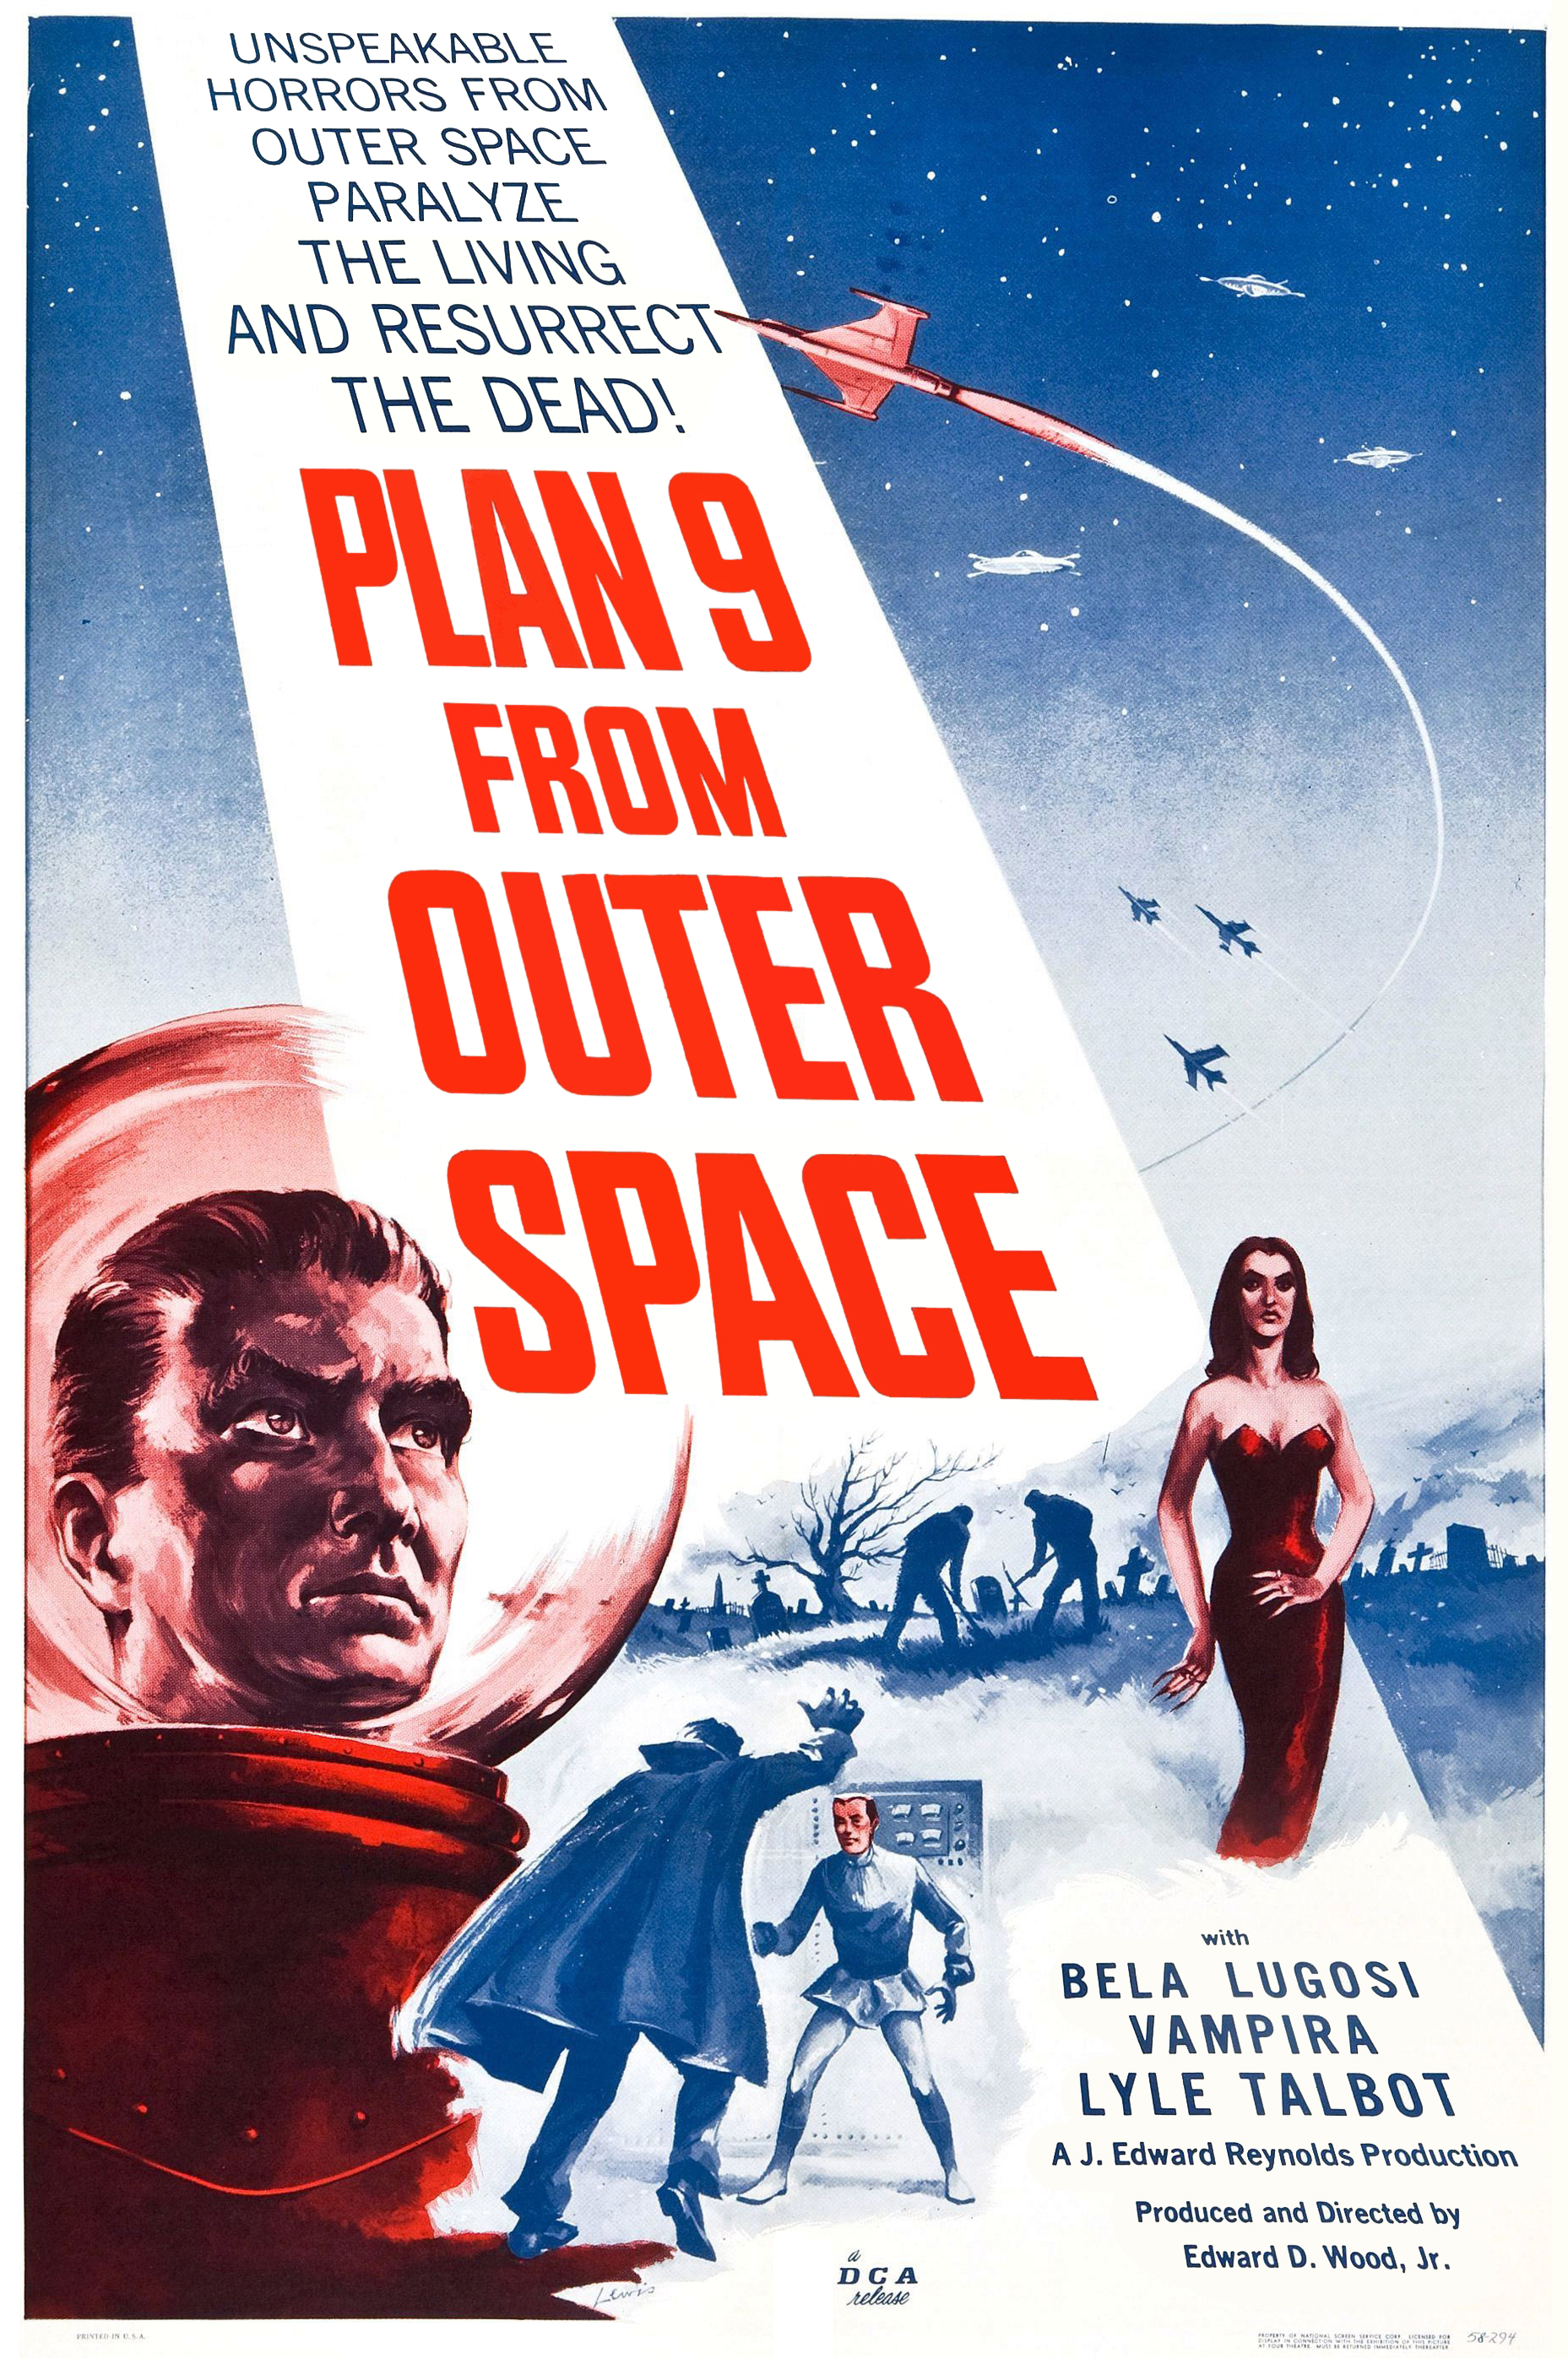 cynthia herrera recommends Vampire From Outer Space